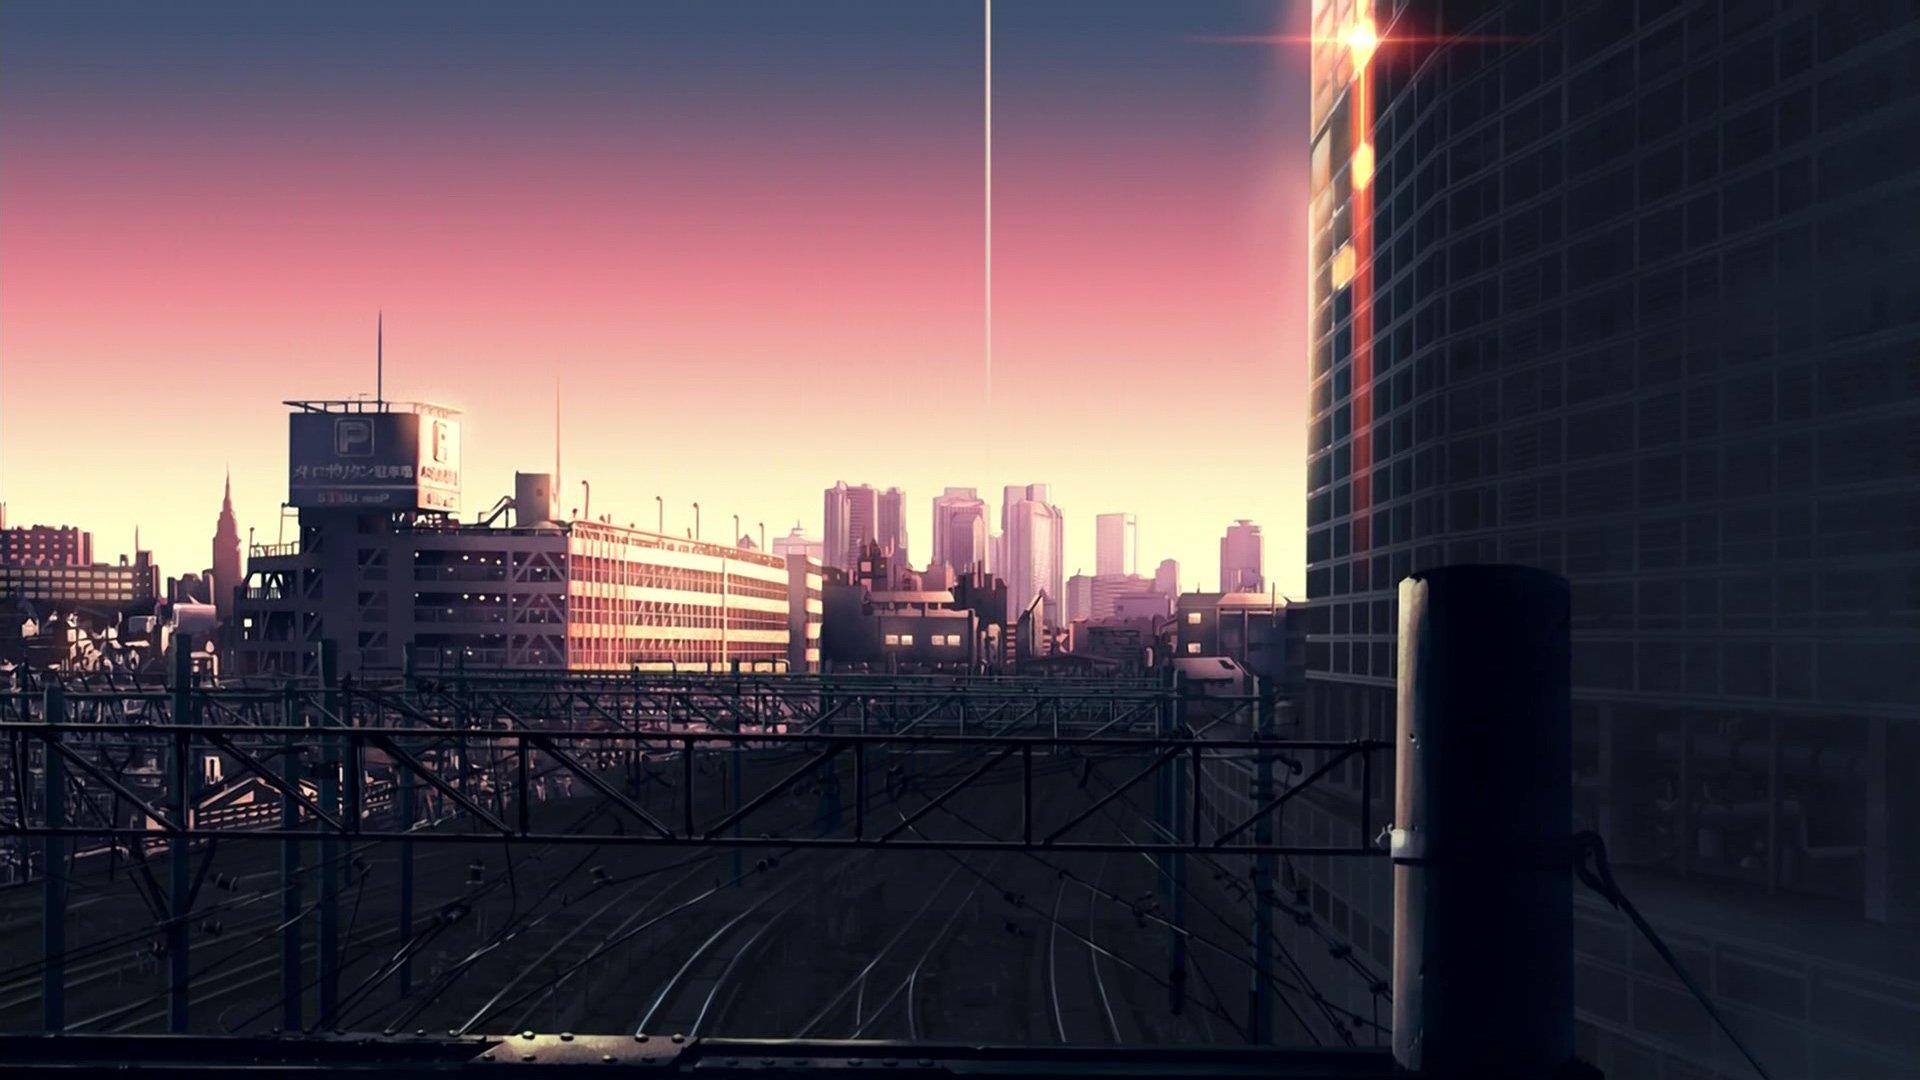 Sunset cityscapes architecture buildings railroad tracks anime